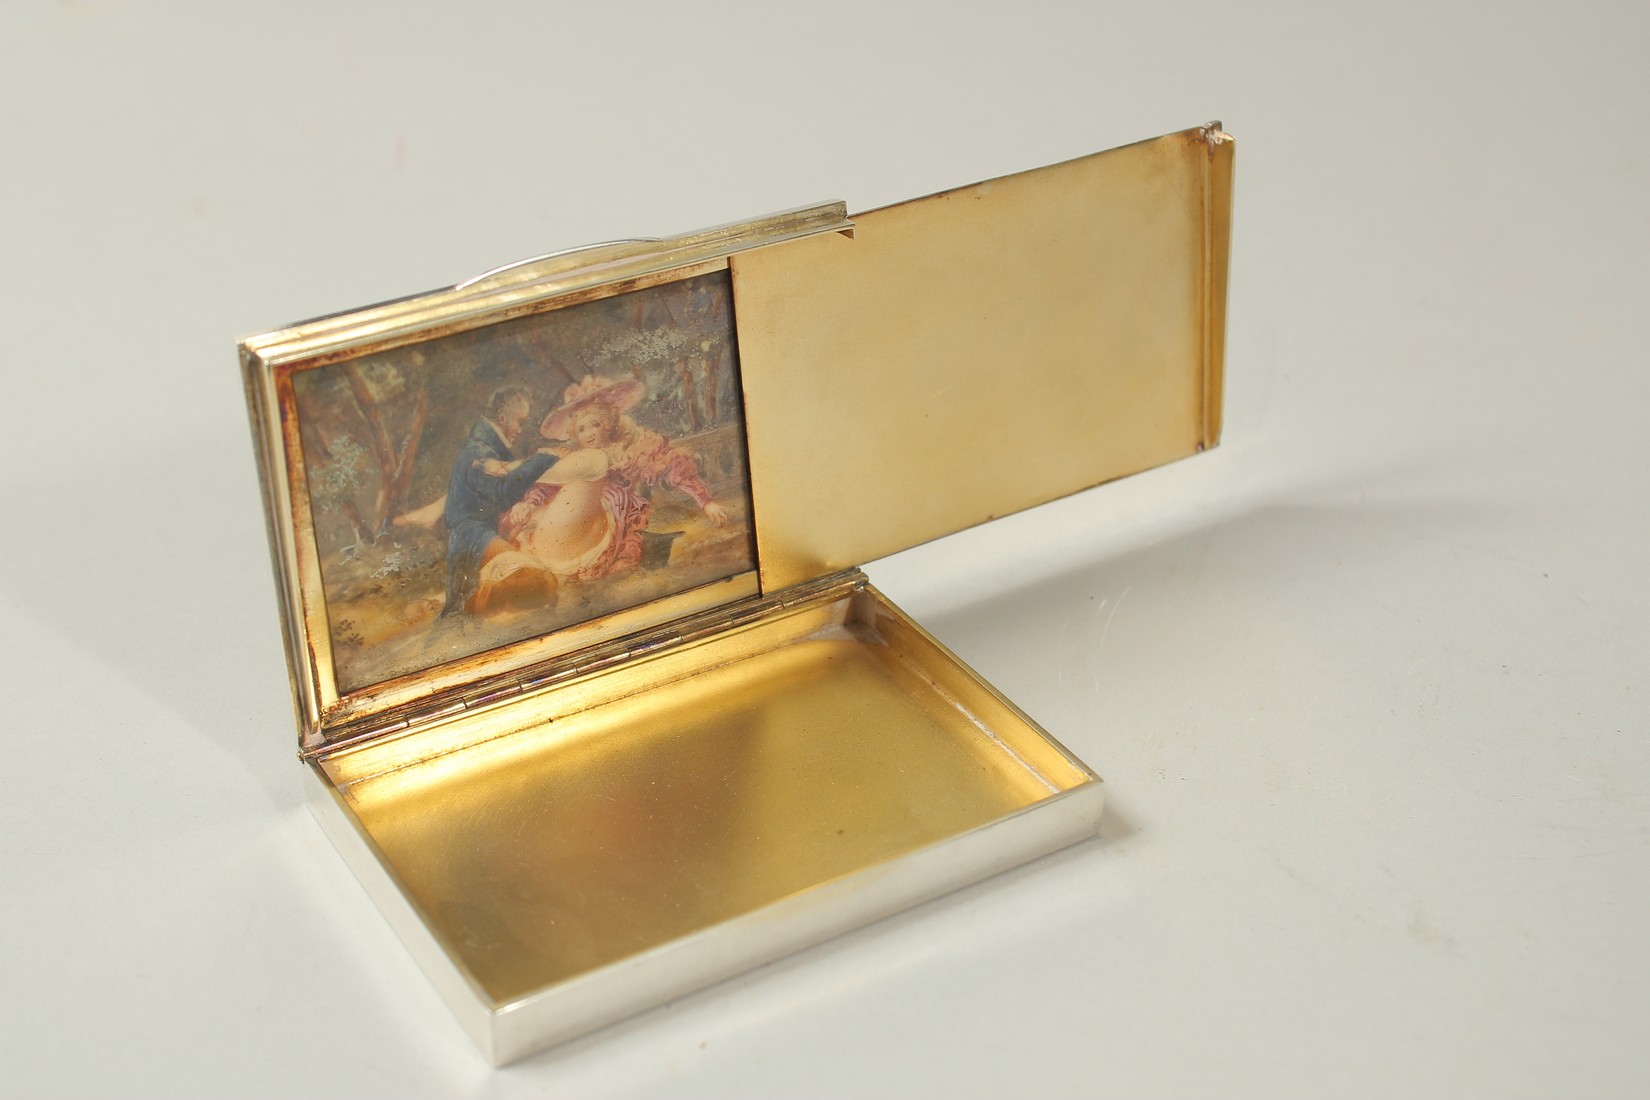 A CONTINENTAL SILVER CIGARETTE CASE with engine turned decoration, the interior of the lid revealing